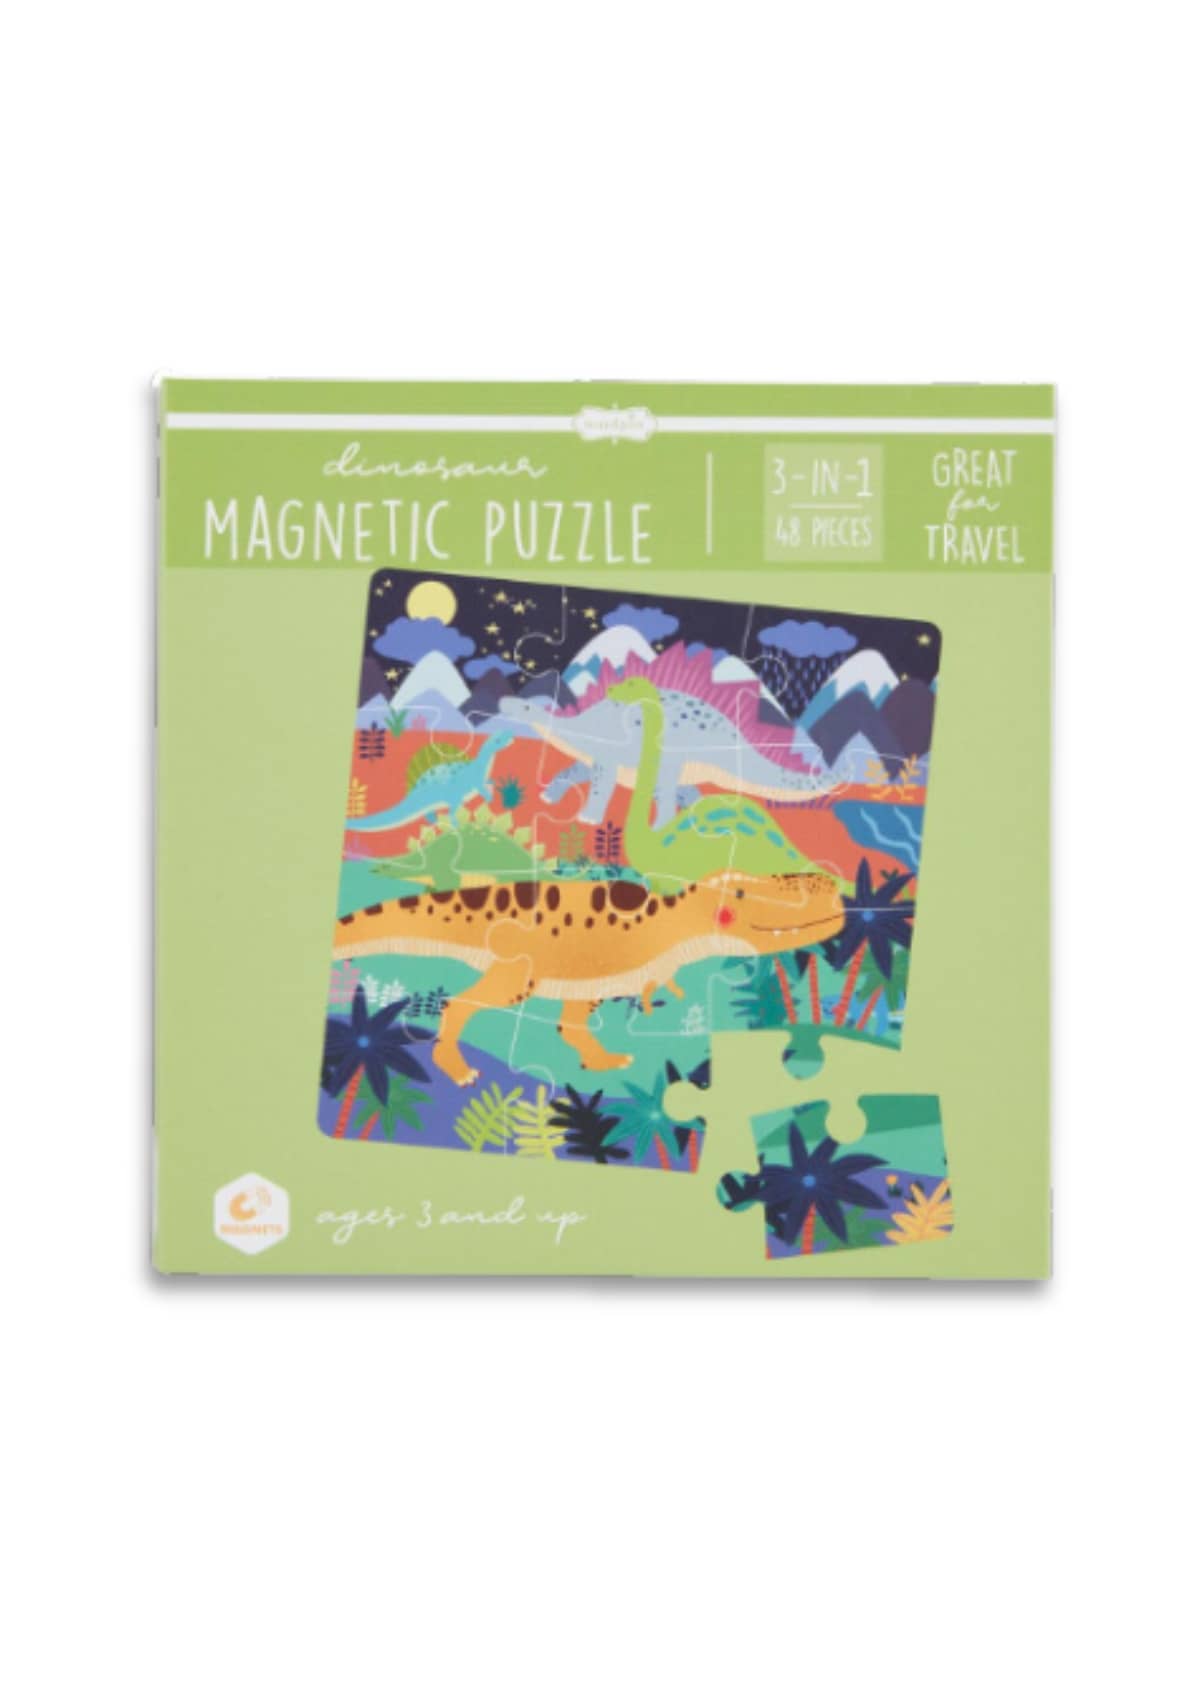 Green magnetic puzzle book with dinosaurs.